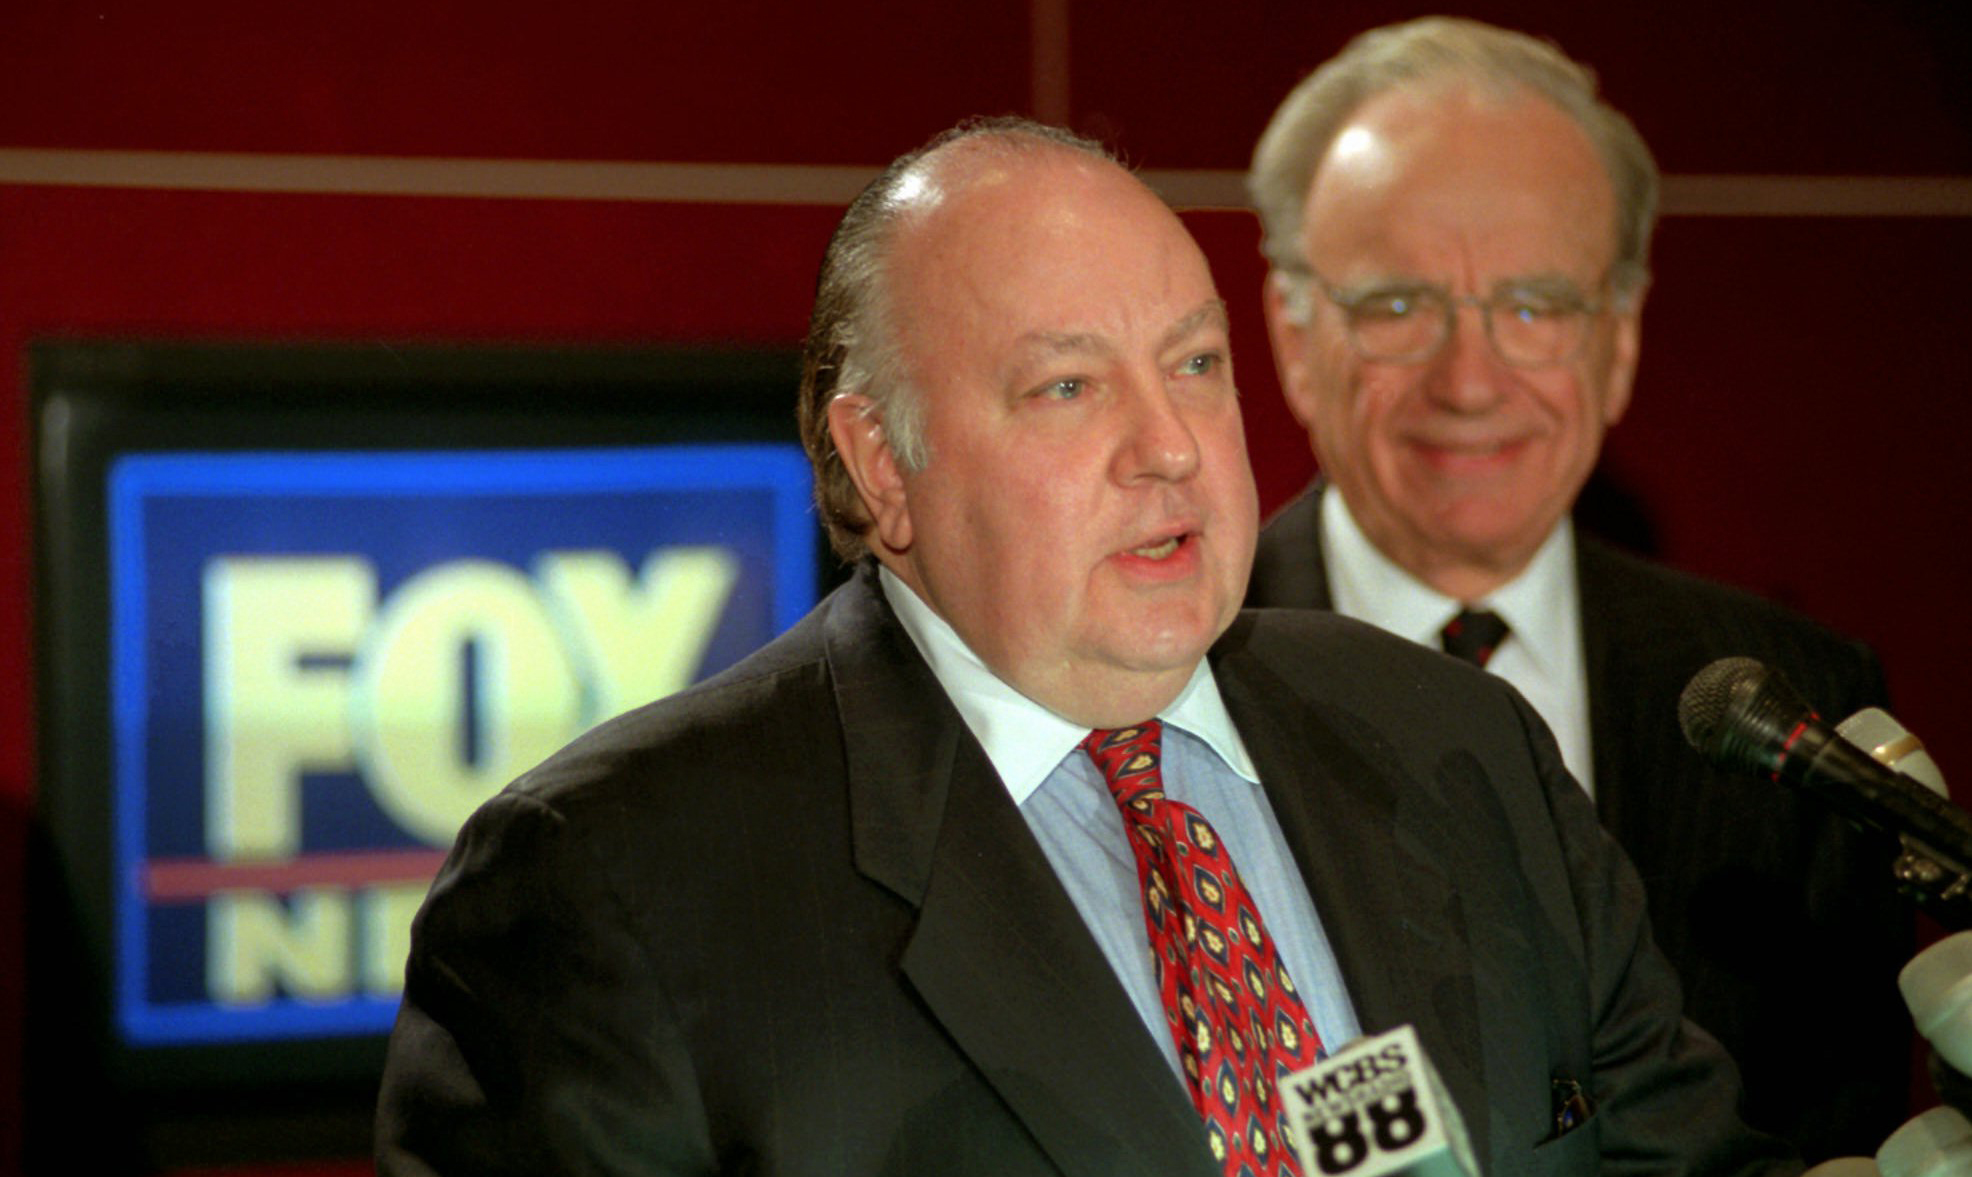 Roger Ailes, left, answers questions after Rupert Murdoch, right, announced Ailes would lead Fox News in 1996. (AP/Richard Drew)